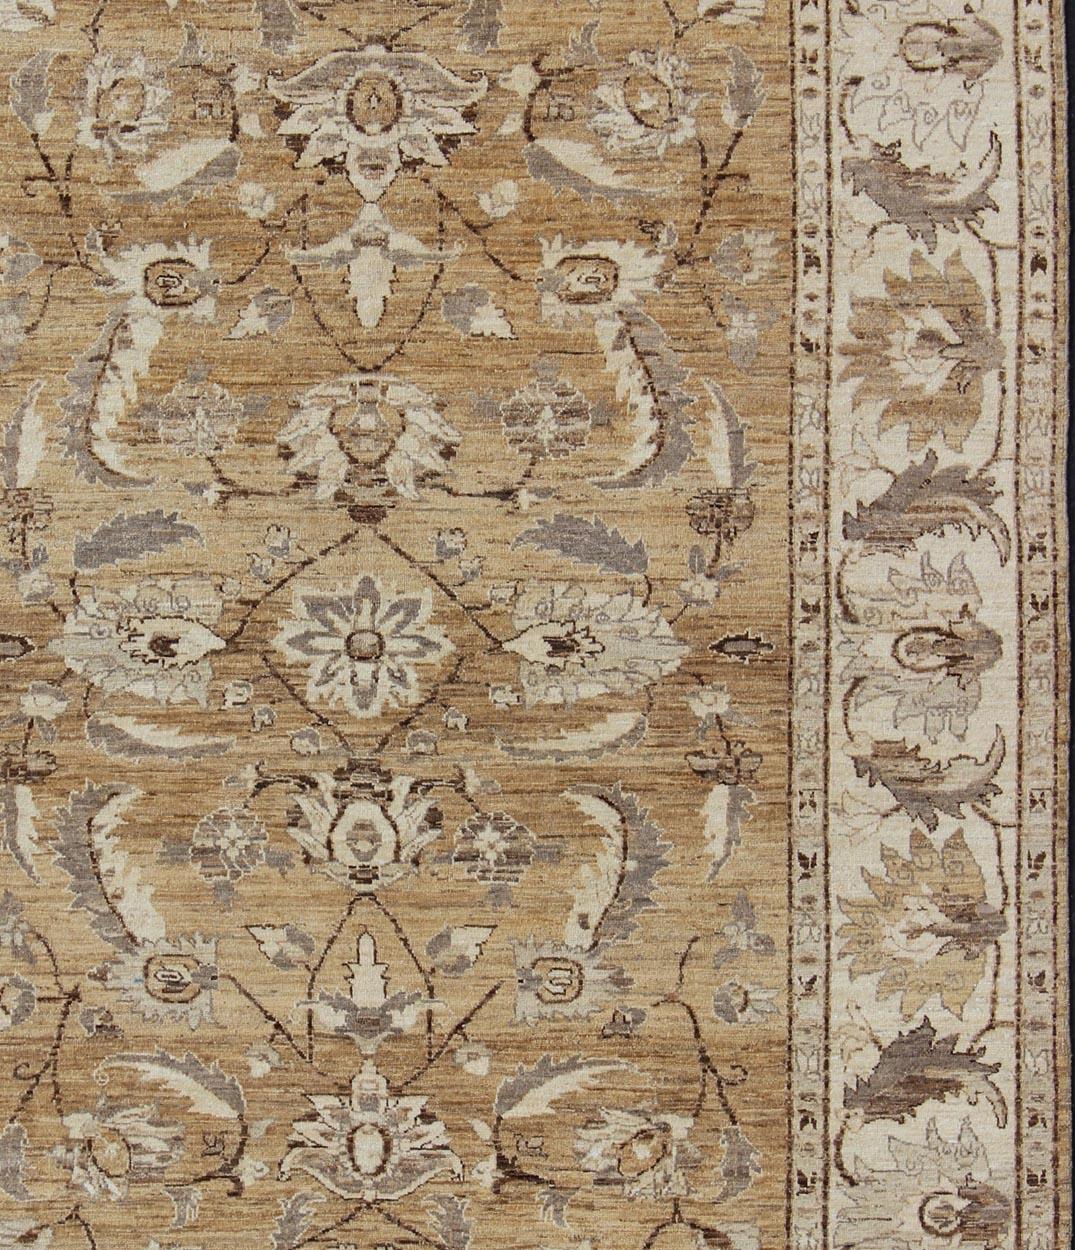 Cream and brown earth tone Afghan floral rug, Keivan Woven Arts / DSP-BC11322 country of origin / type: Afghan / circa 1980.

Measures: 8' x 10'2